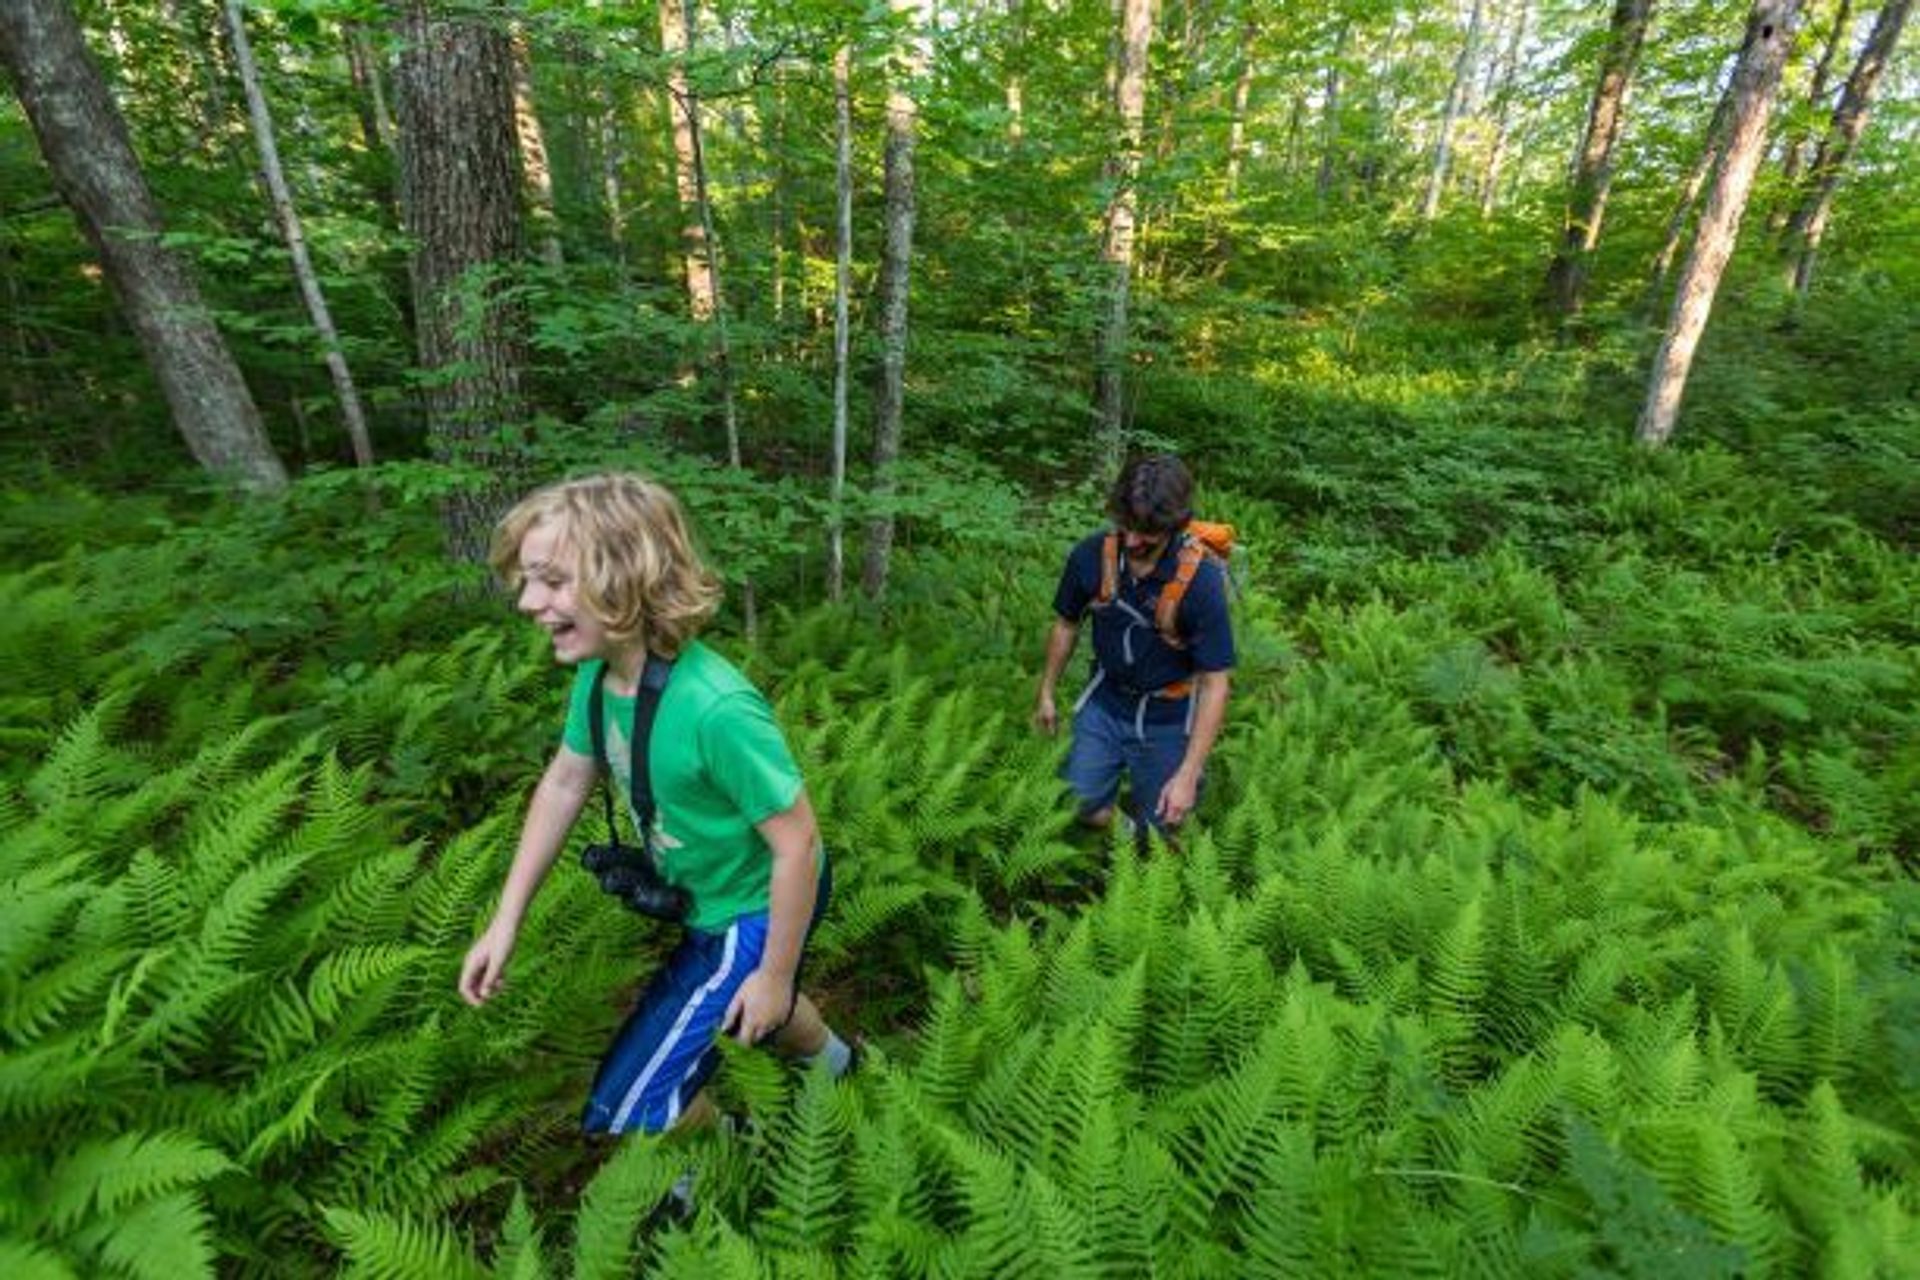 A father and son hiking through a field of ferns.